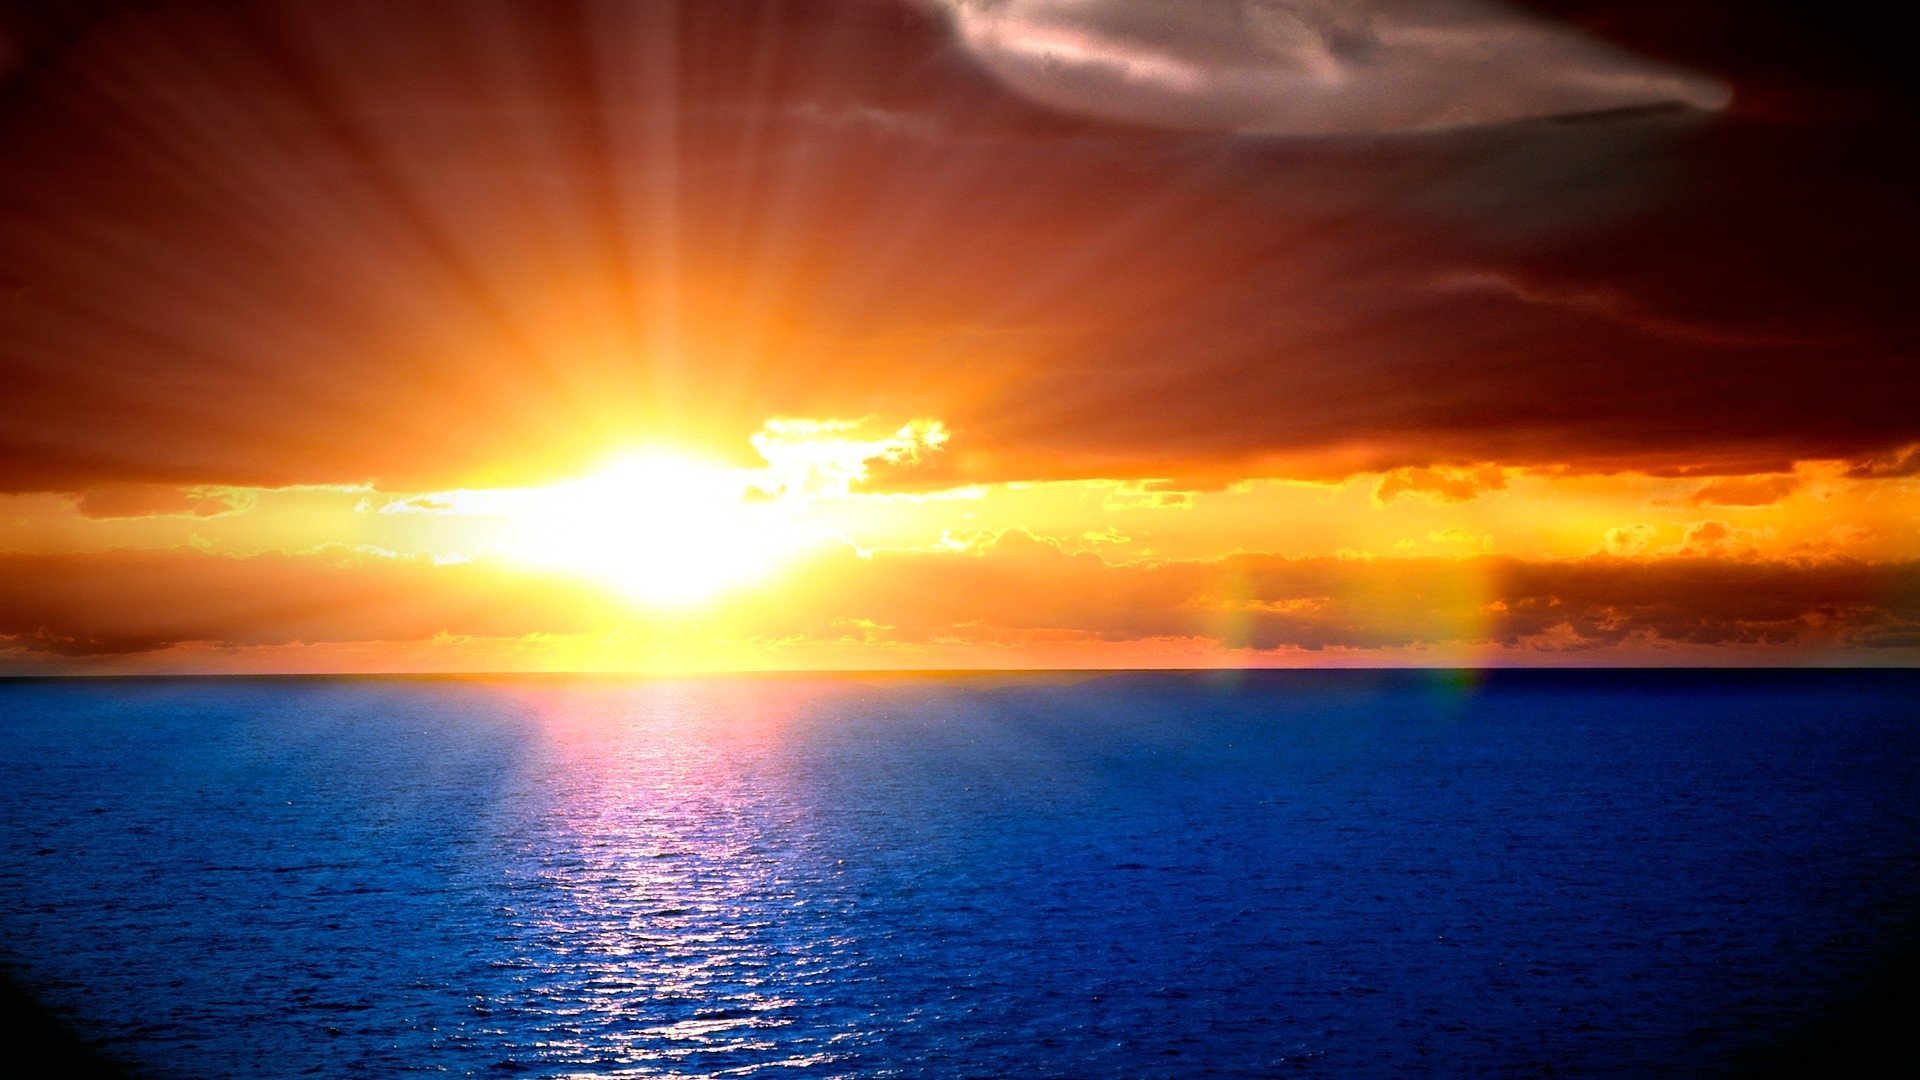 Sunset On The Ocean Wallpaper Cool le4b2x 1920x1080 px